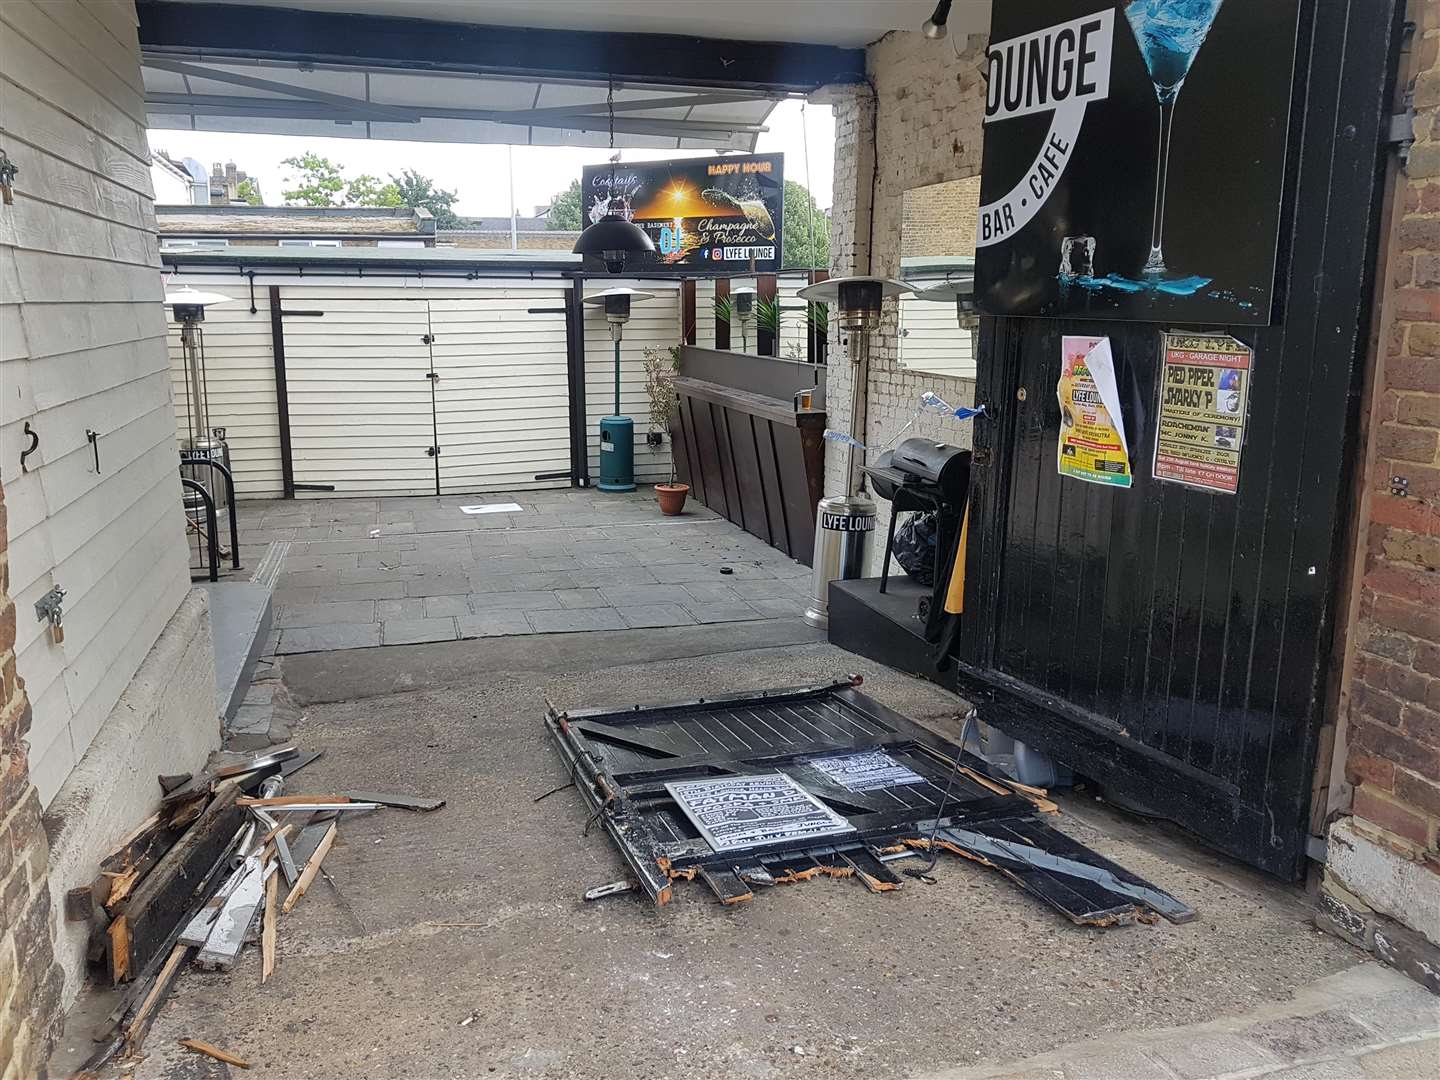 Damage caused by a car which drove into Lyfe Lounge, Herne Bay. (3317963)